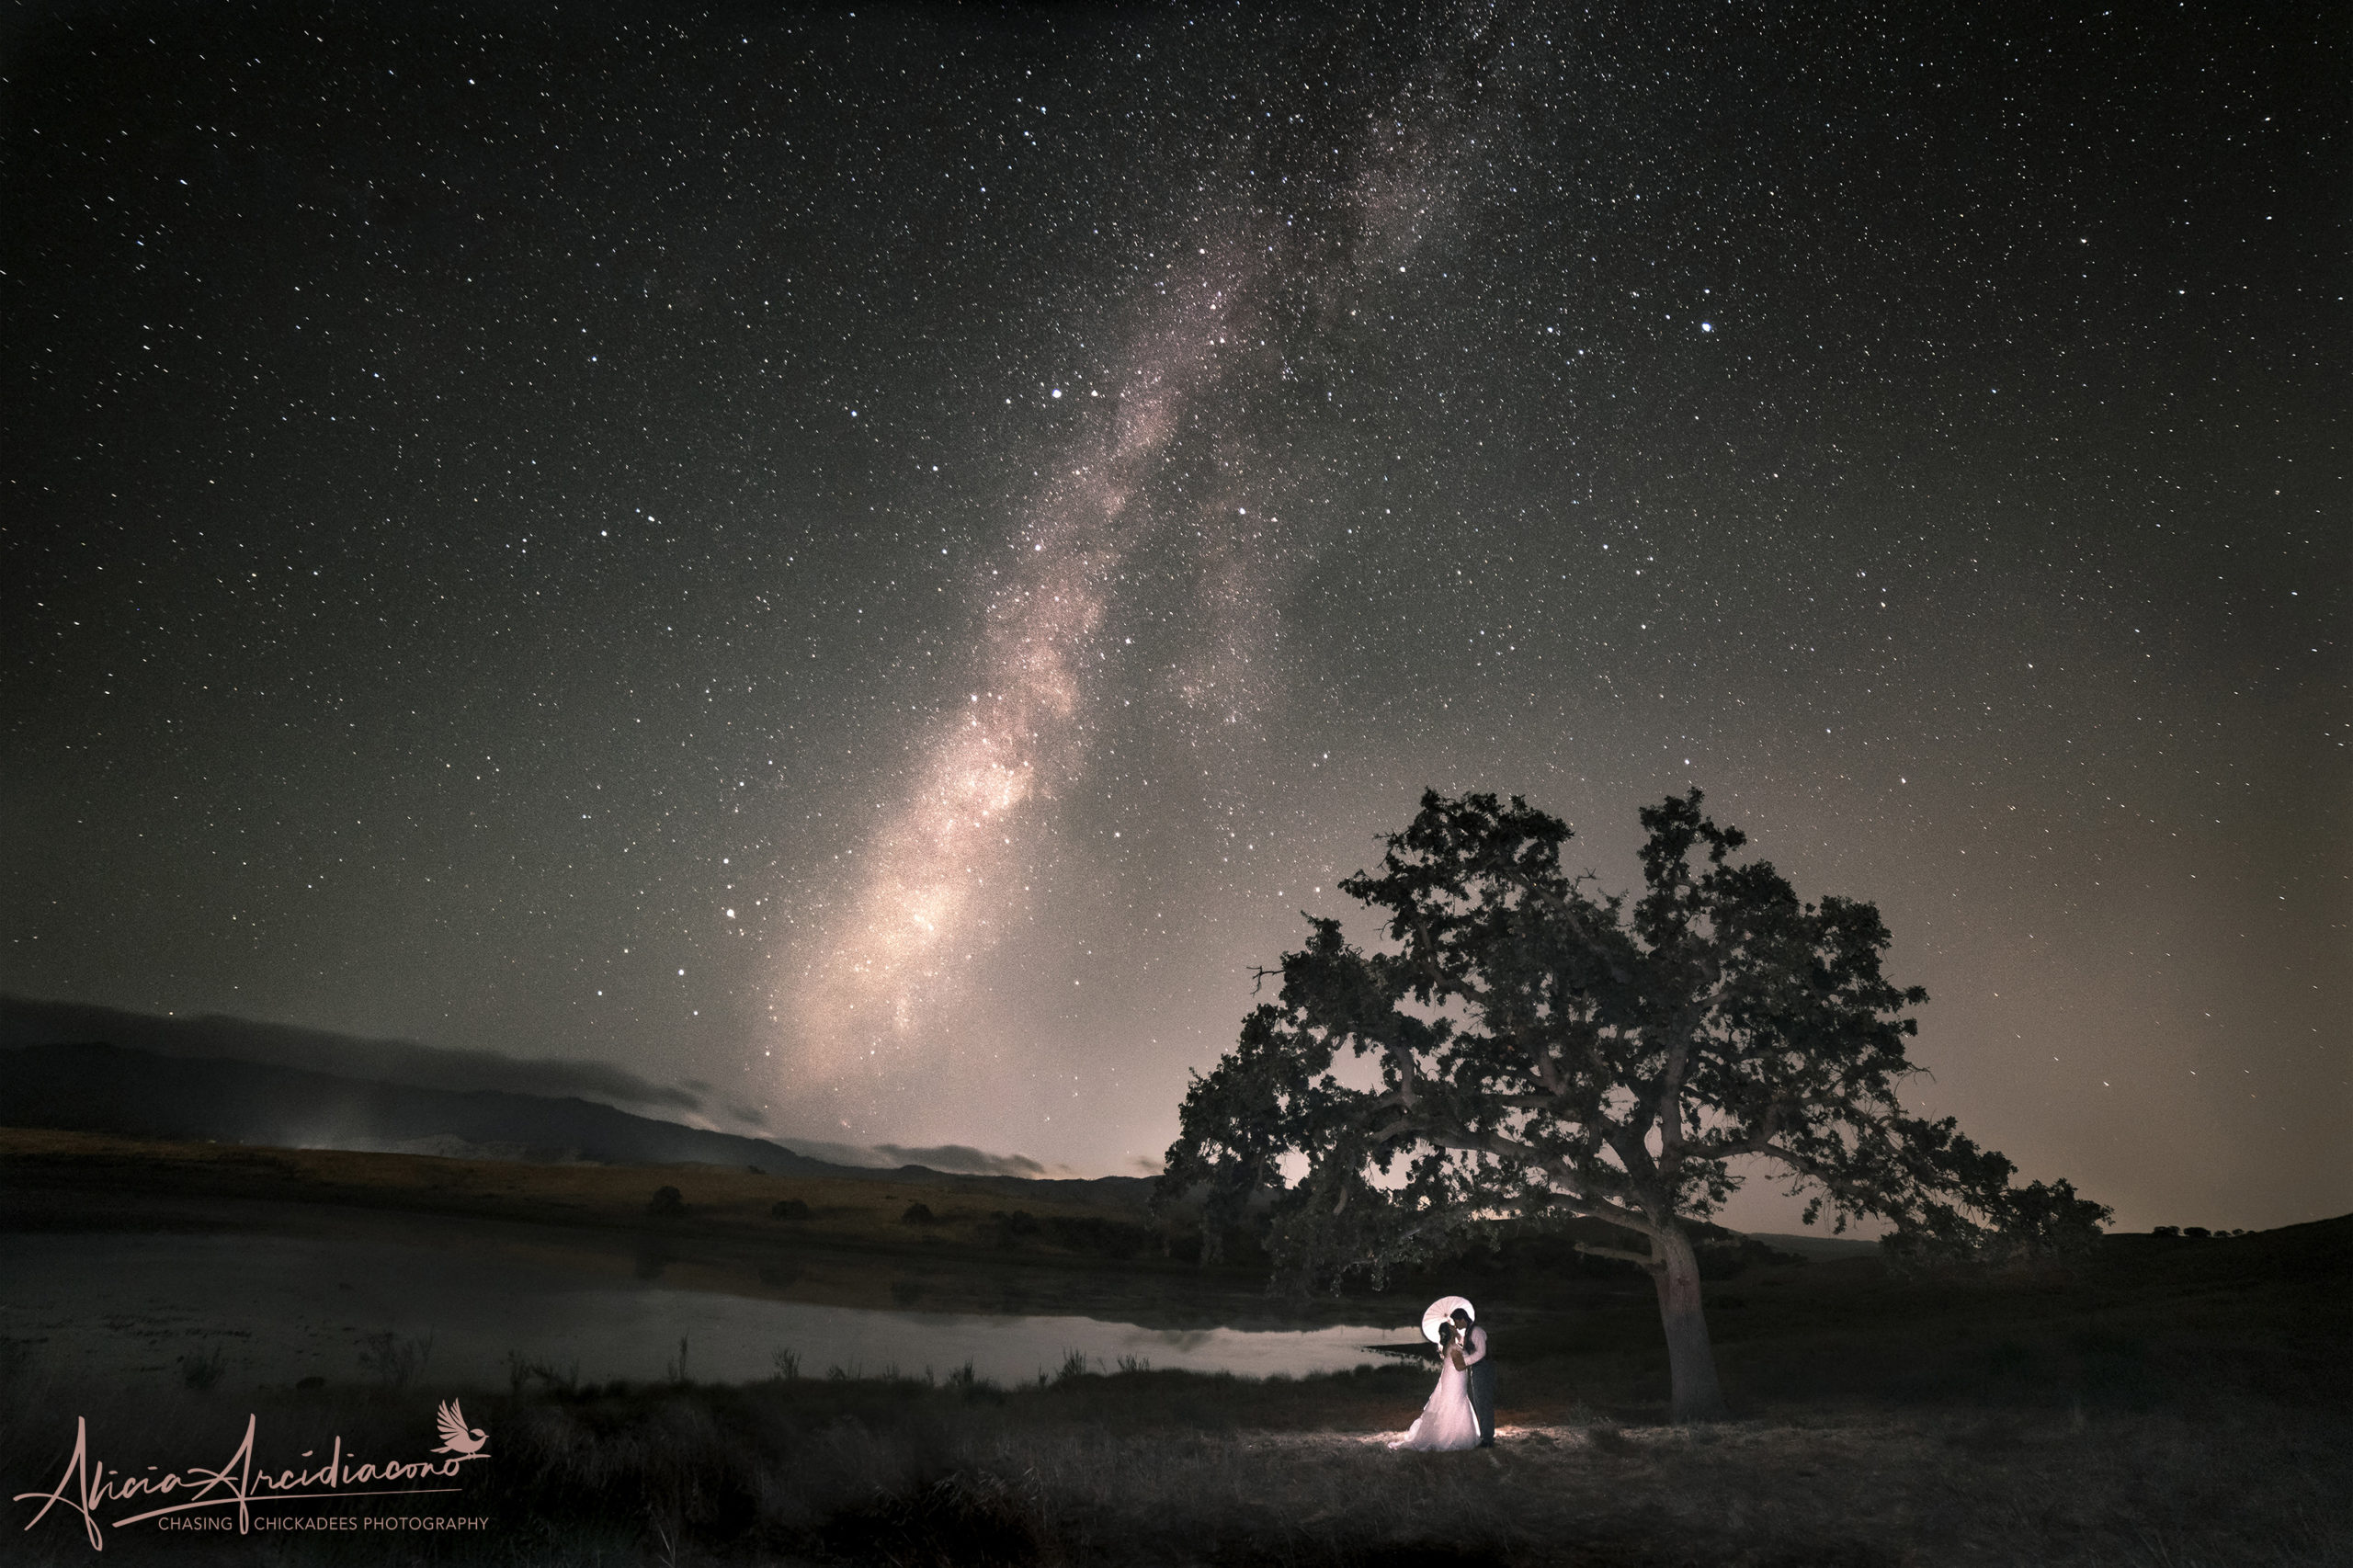 How to Photograph the Milky Way for Weddings